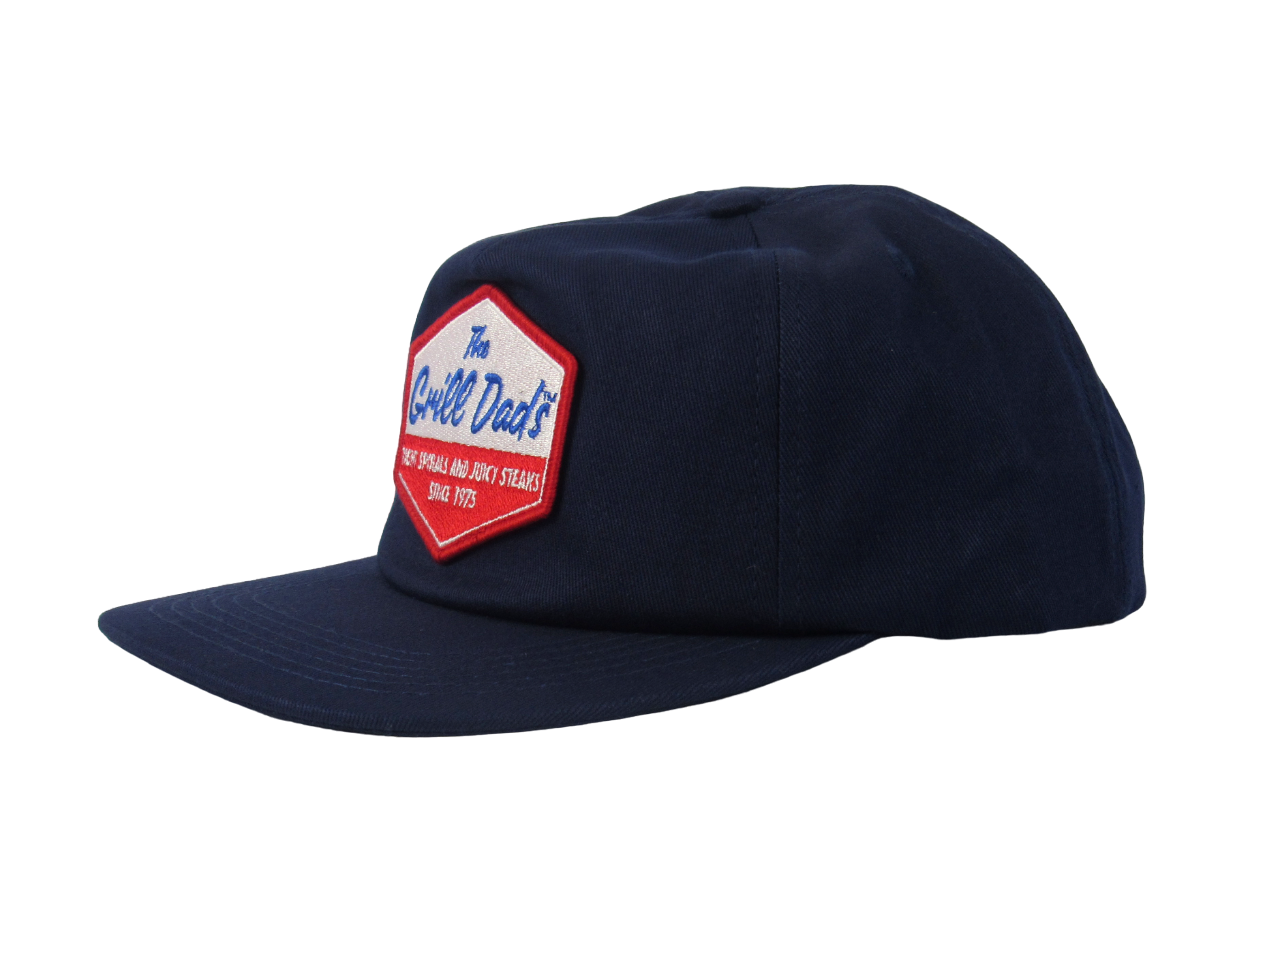 The Grill Dads 1975 Patch Hat